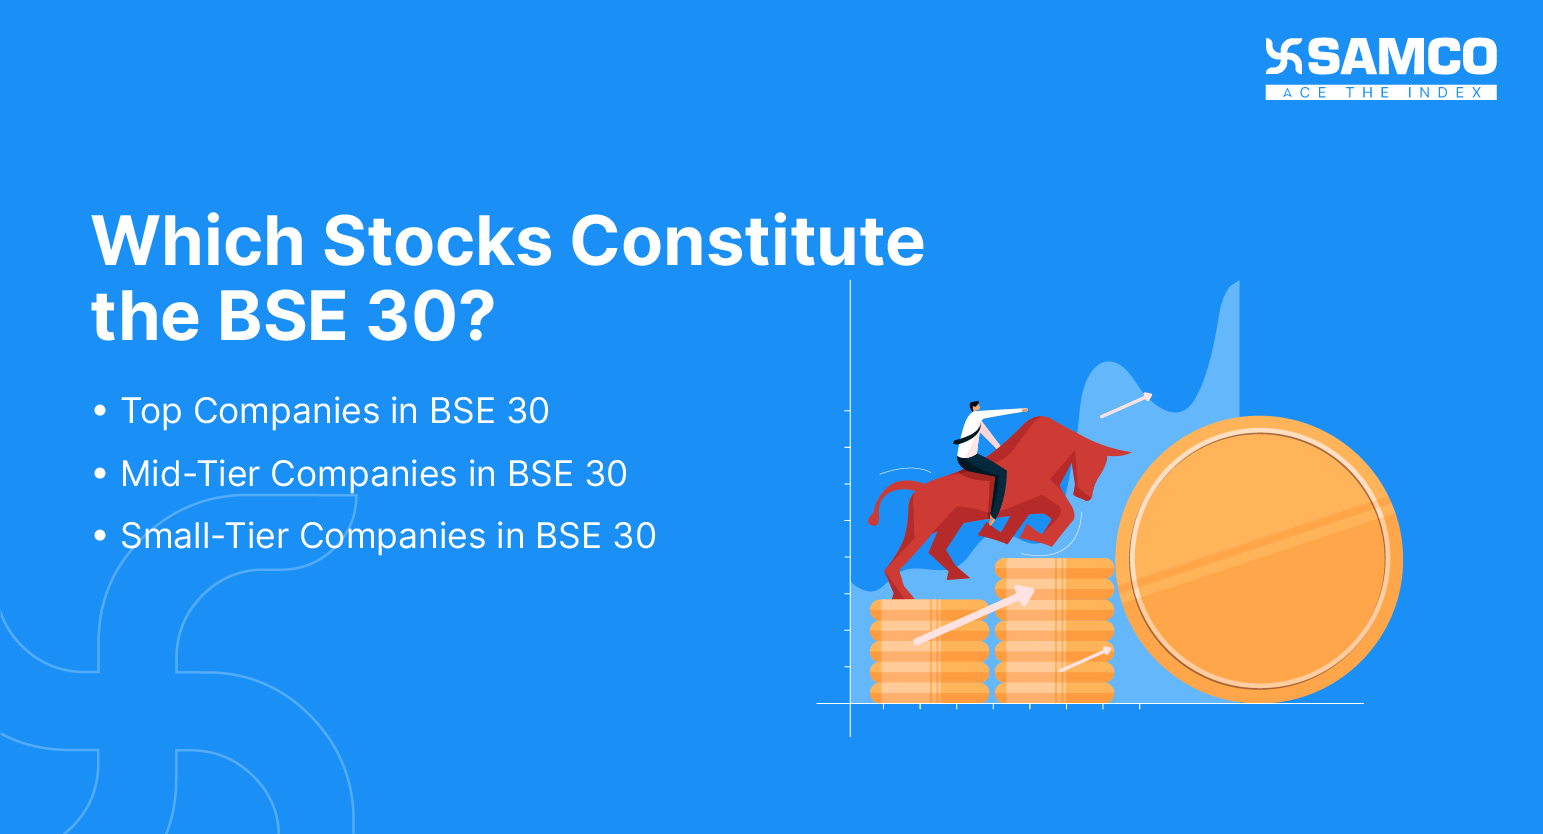 Which Stocks Constitute the BSE 30?